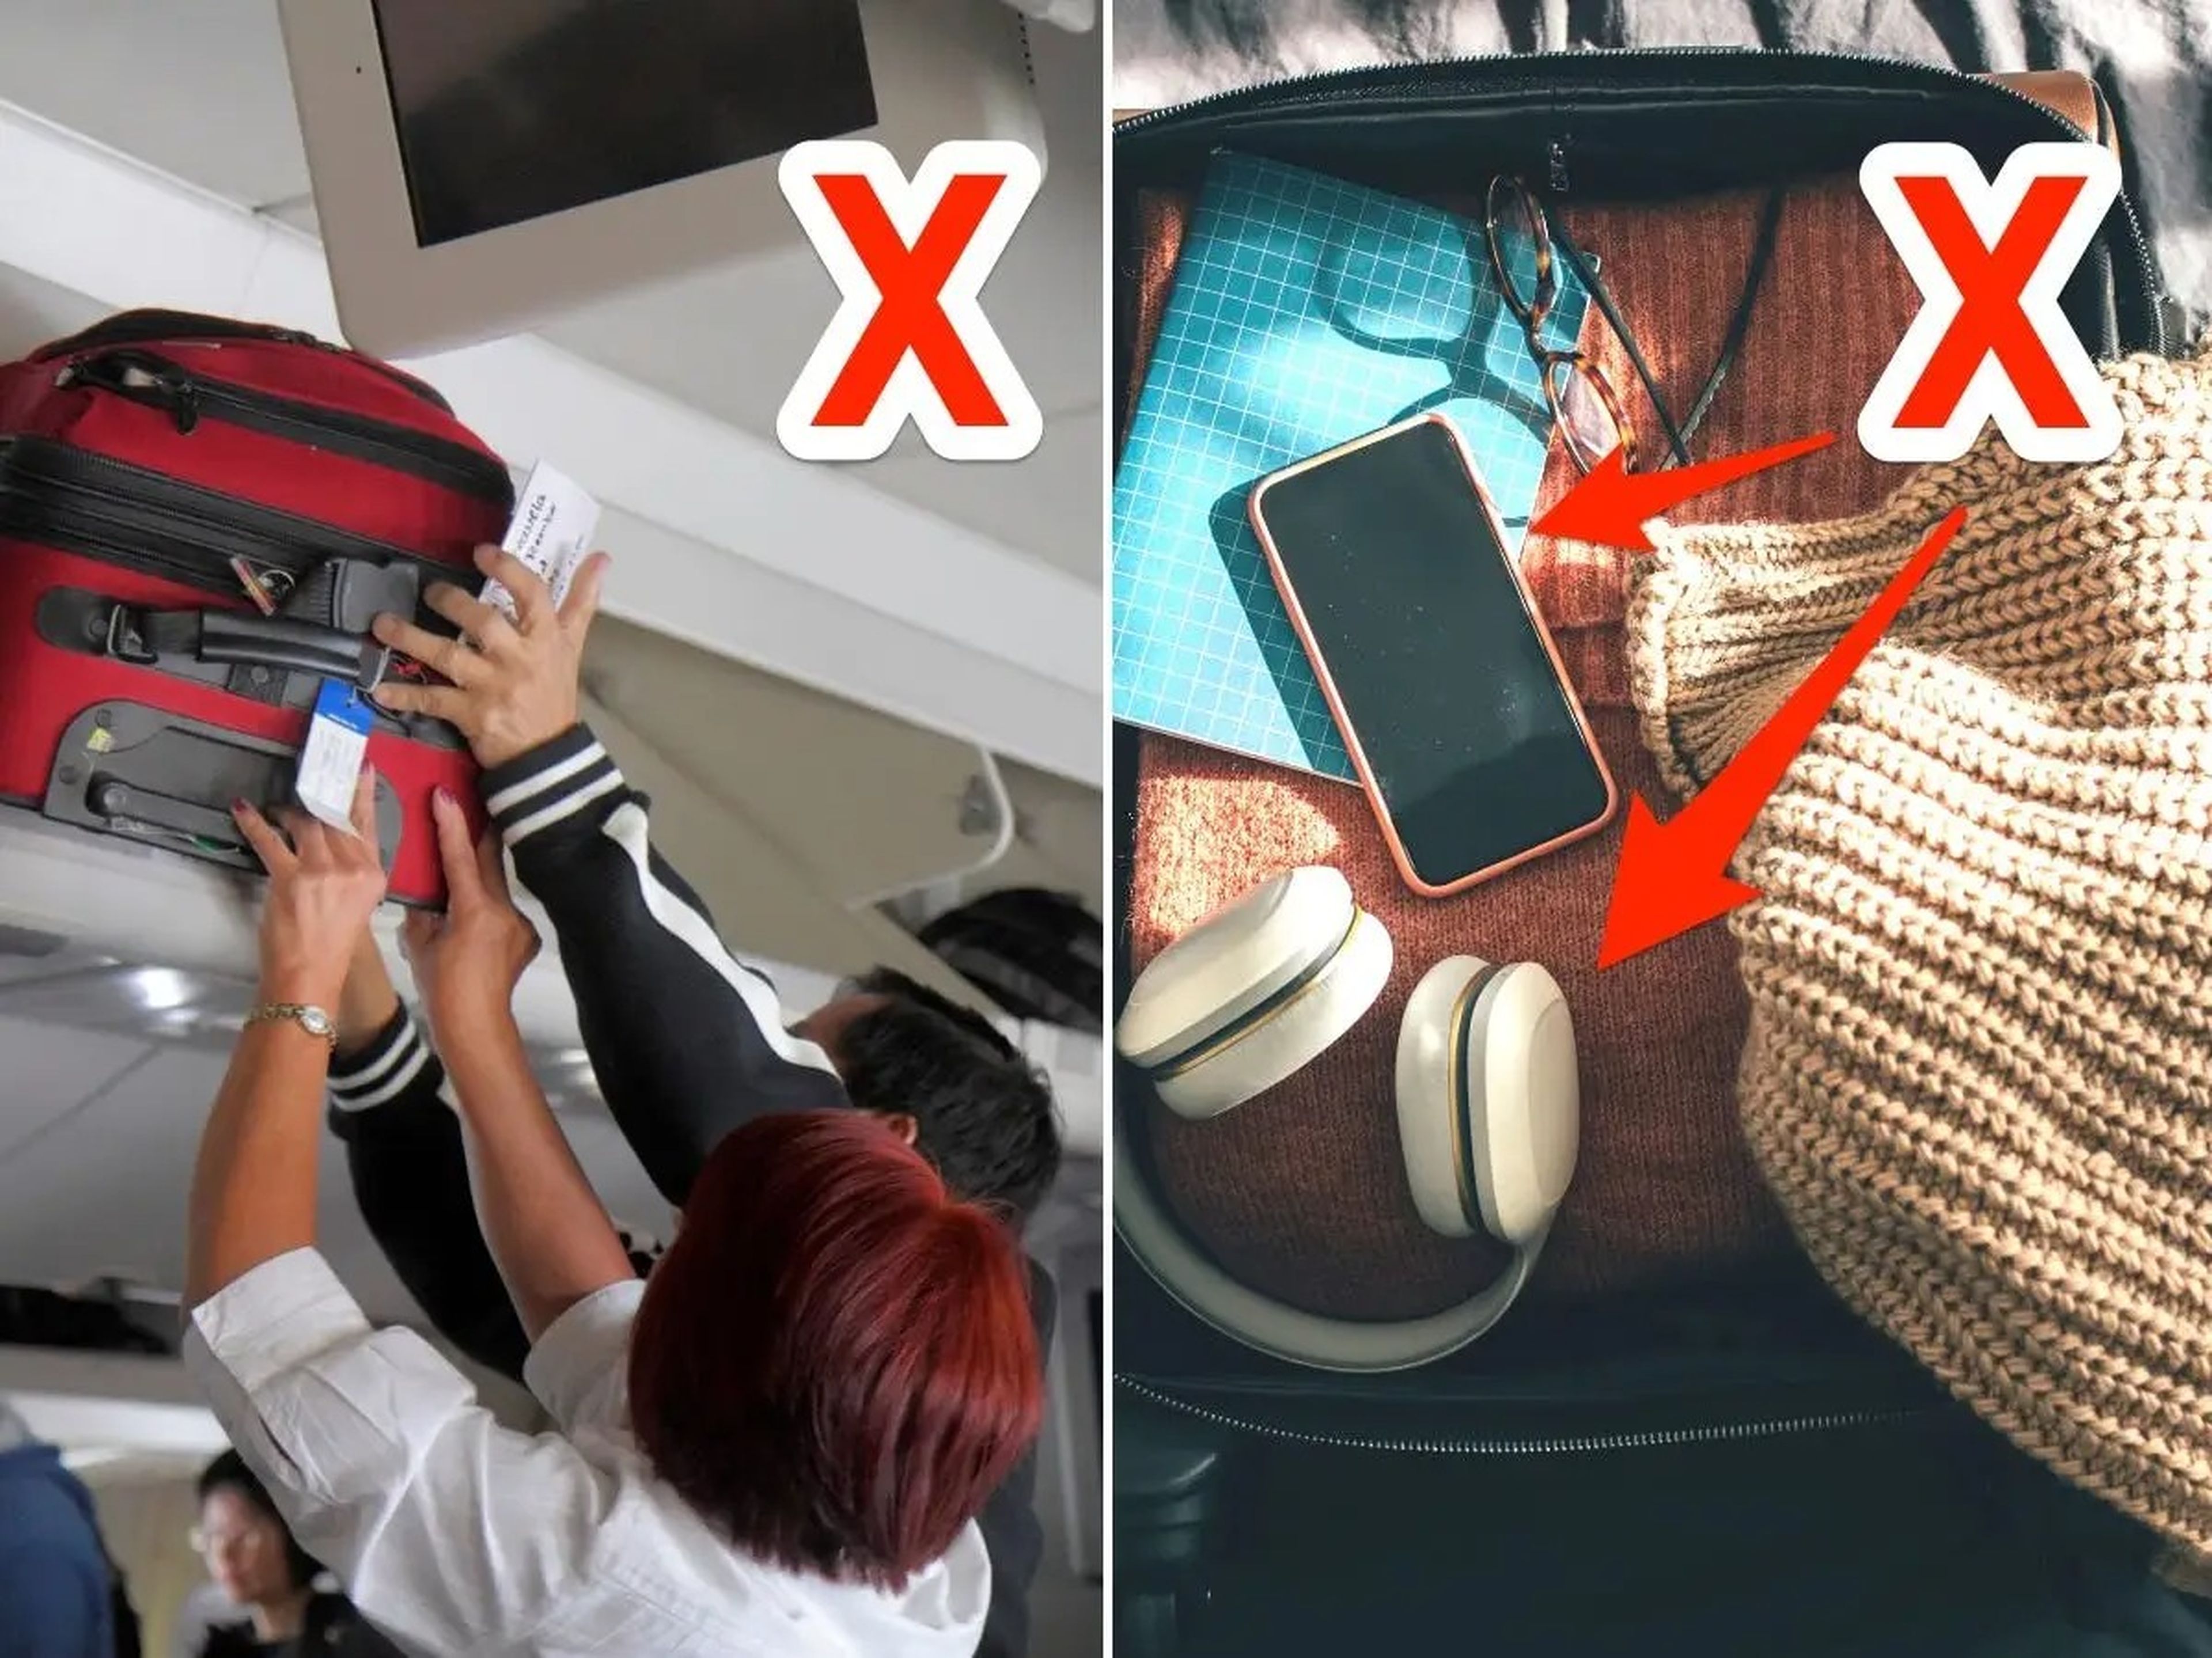 A flight attendant told Insider that passengers commonly overpack and leave important items in their carry-on.